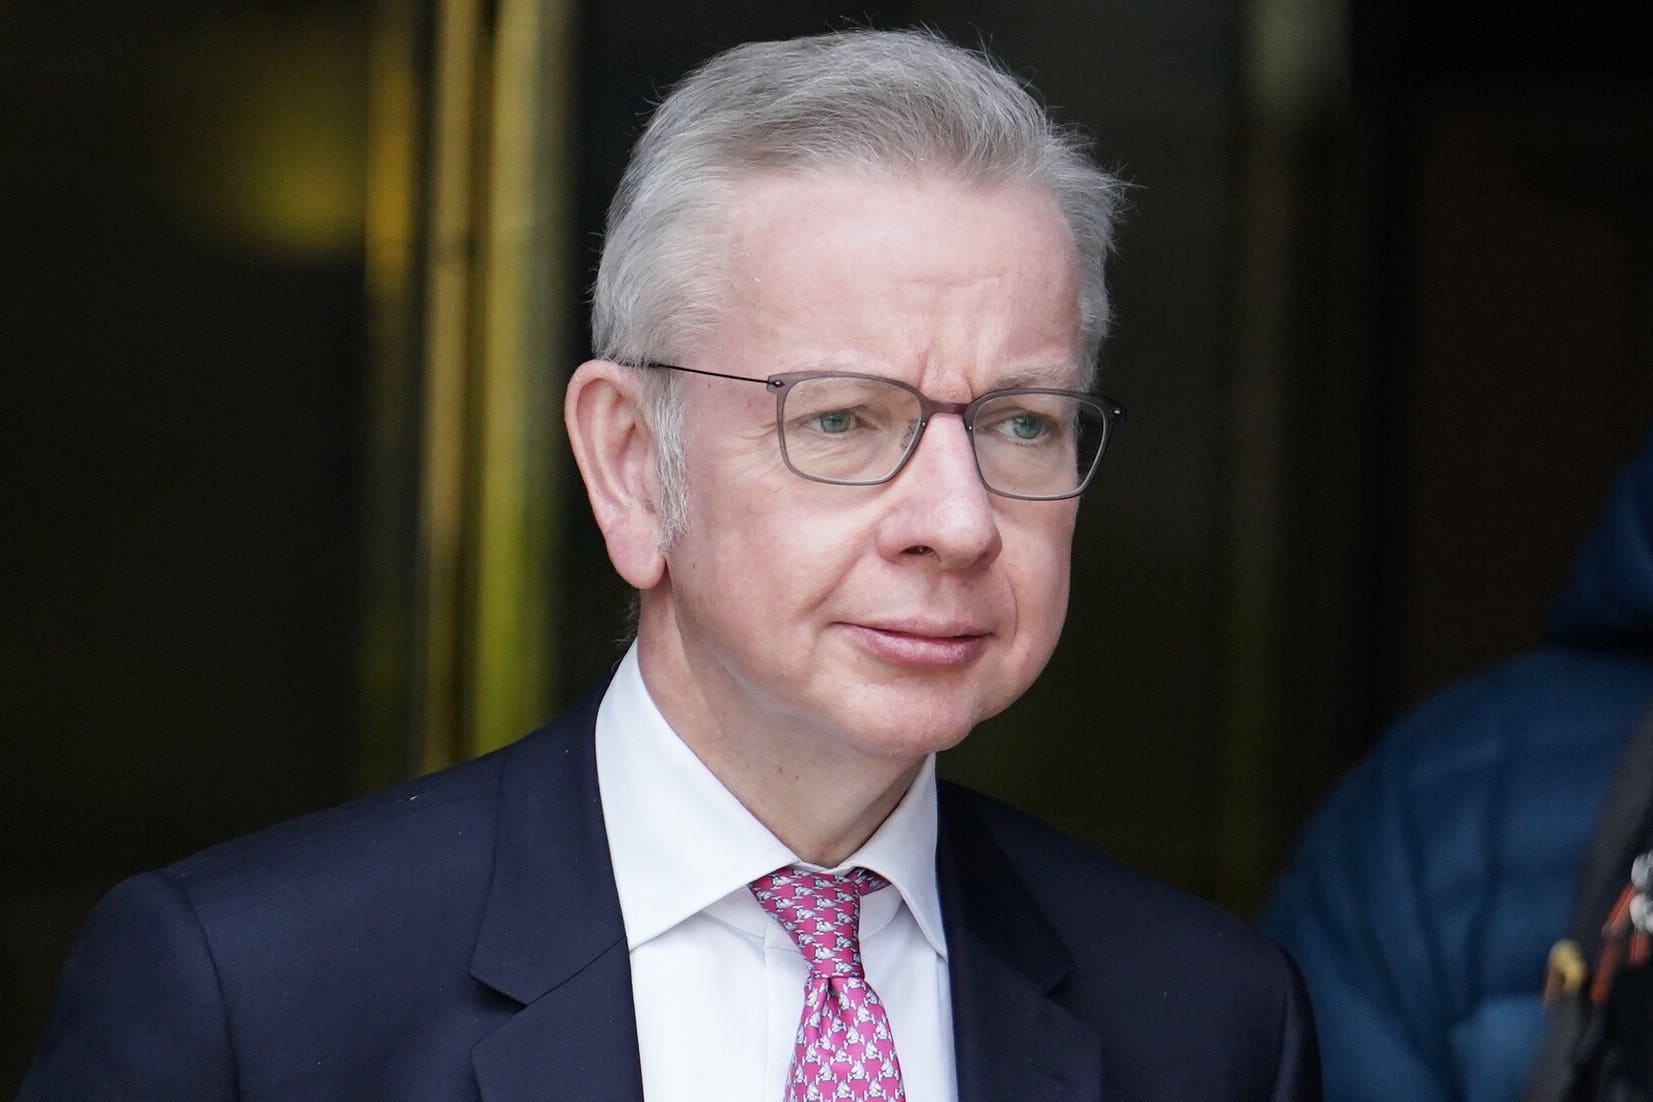 Michael Gove played a prominent role in the Vote Leave campaign (Jordan Pettitt/PA)